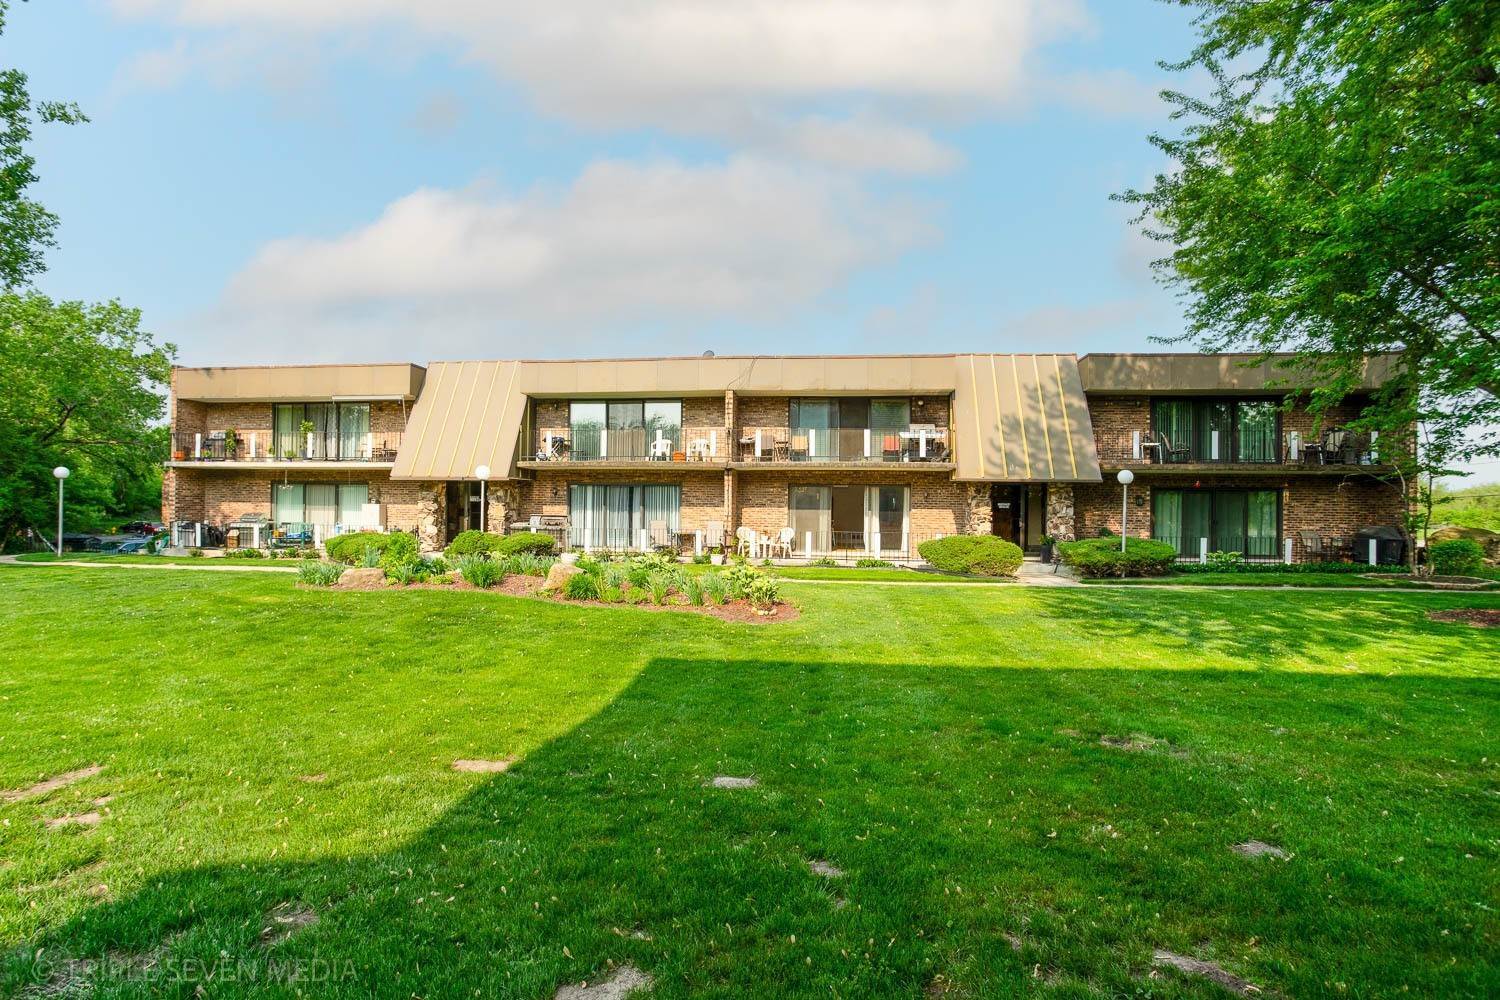 Single Family for Sale at Palos Hills, IL 60465